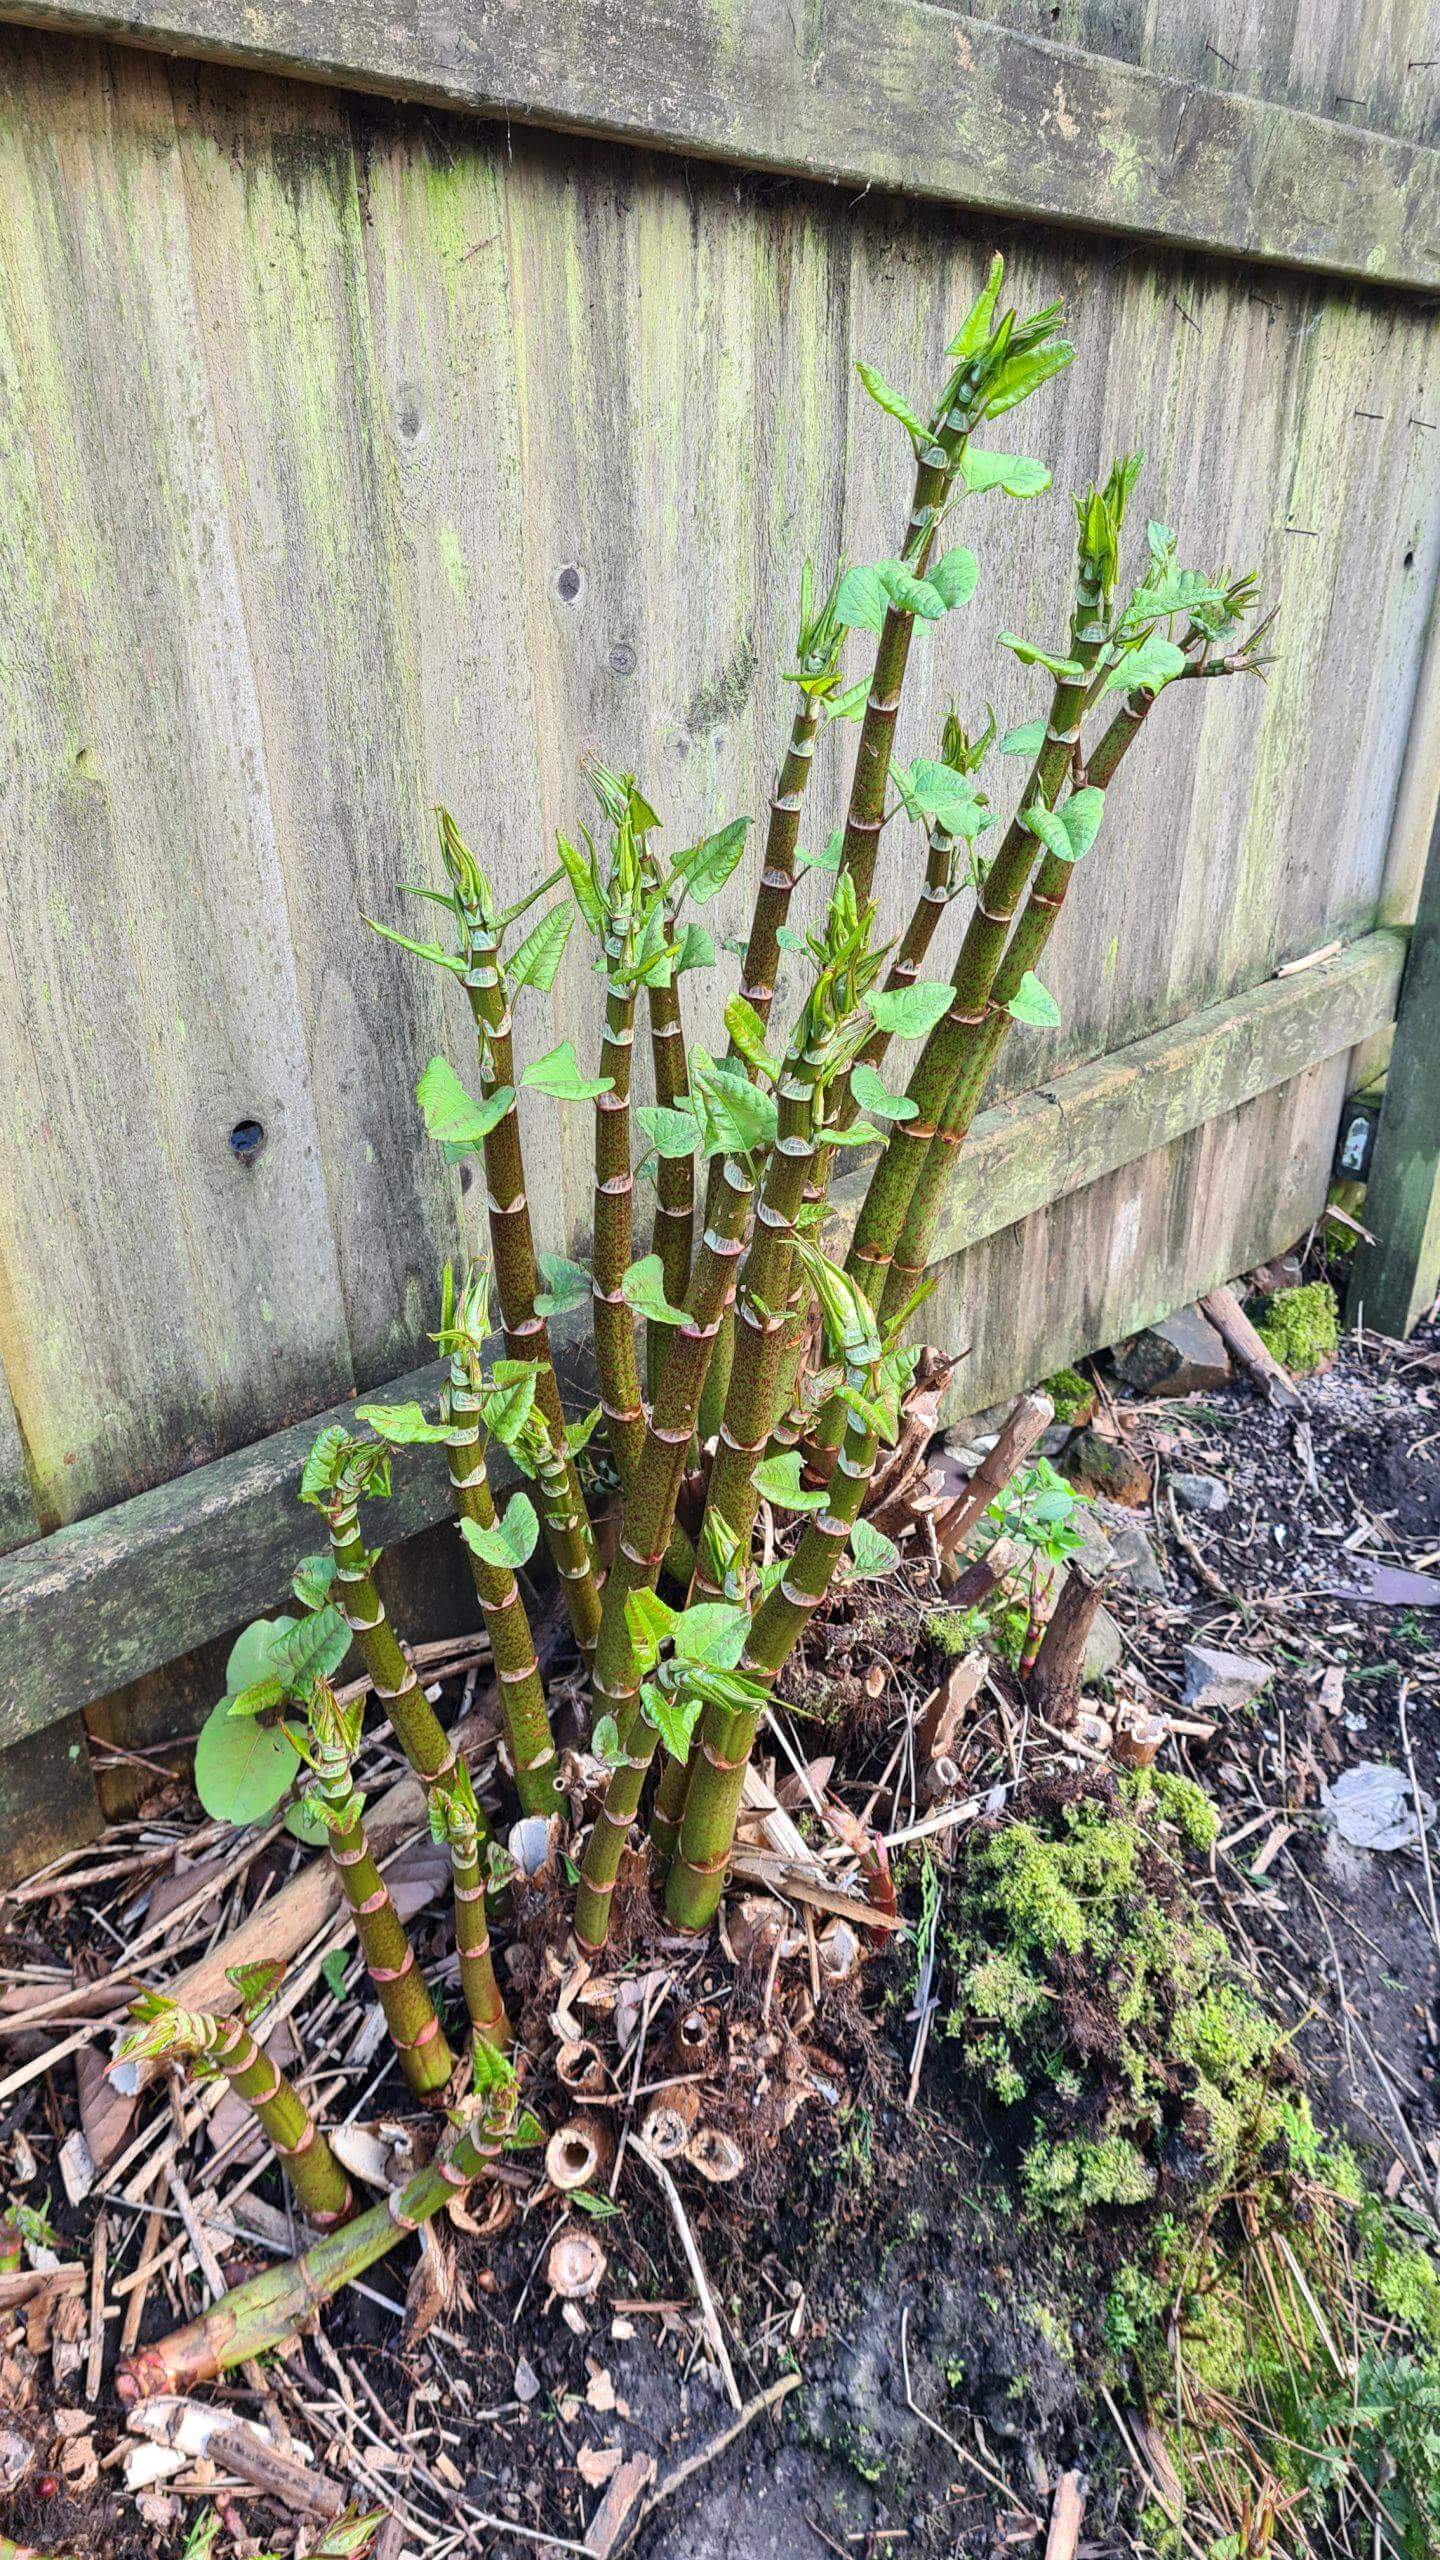 Japanese knotweed growing rapidly in early March